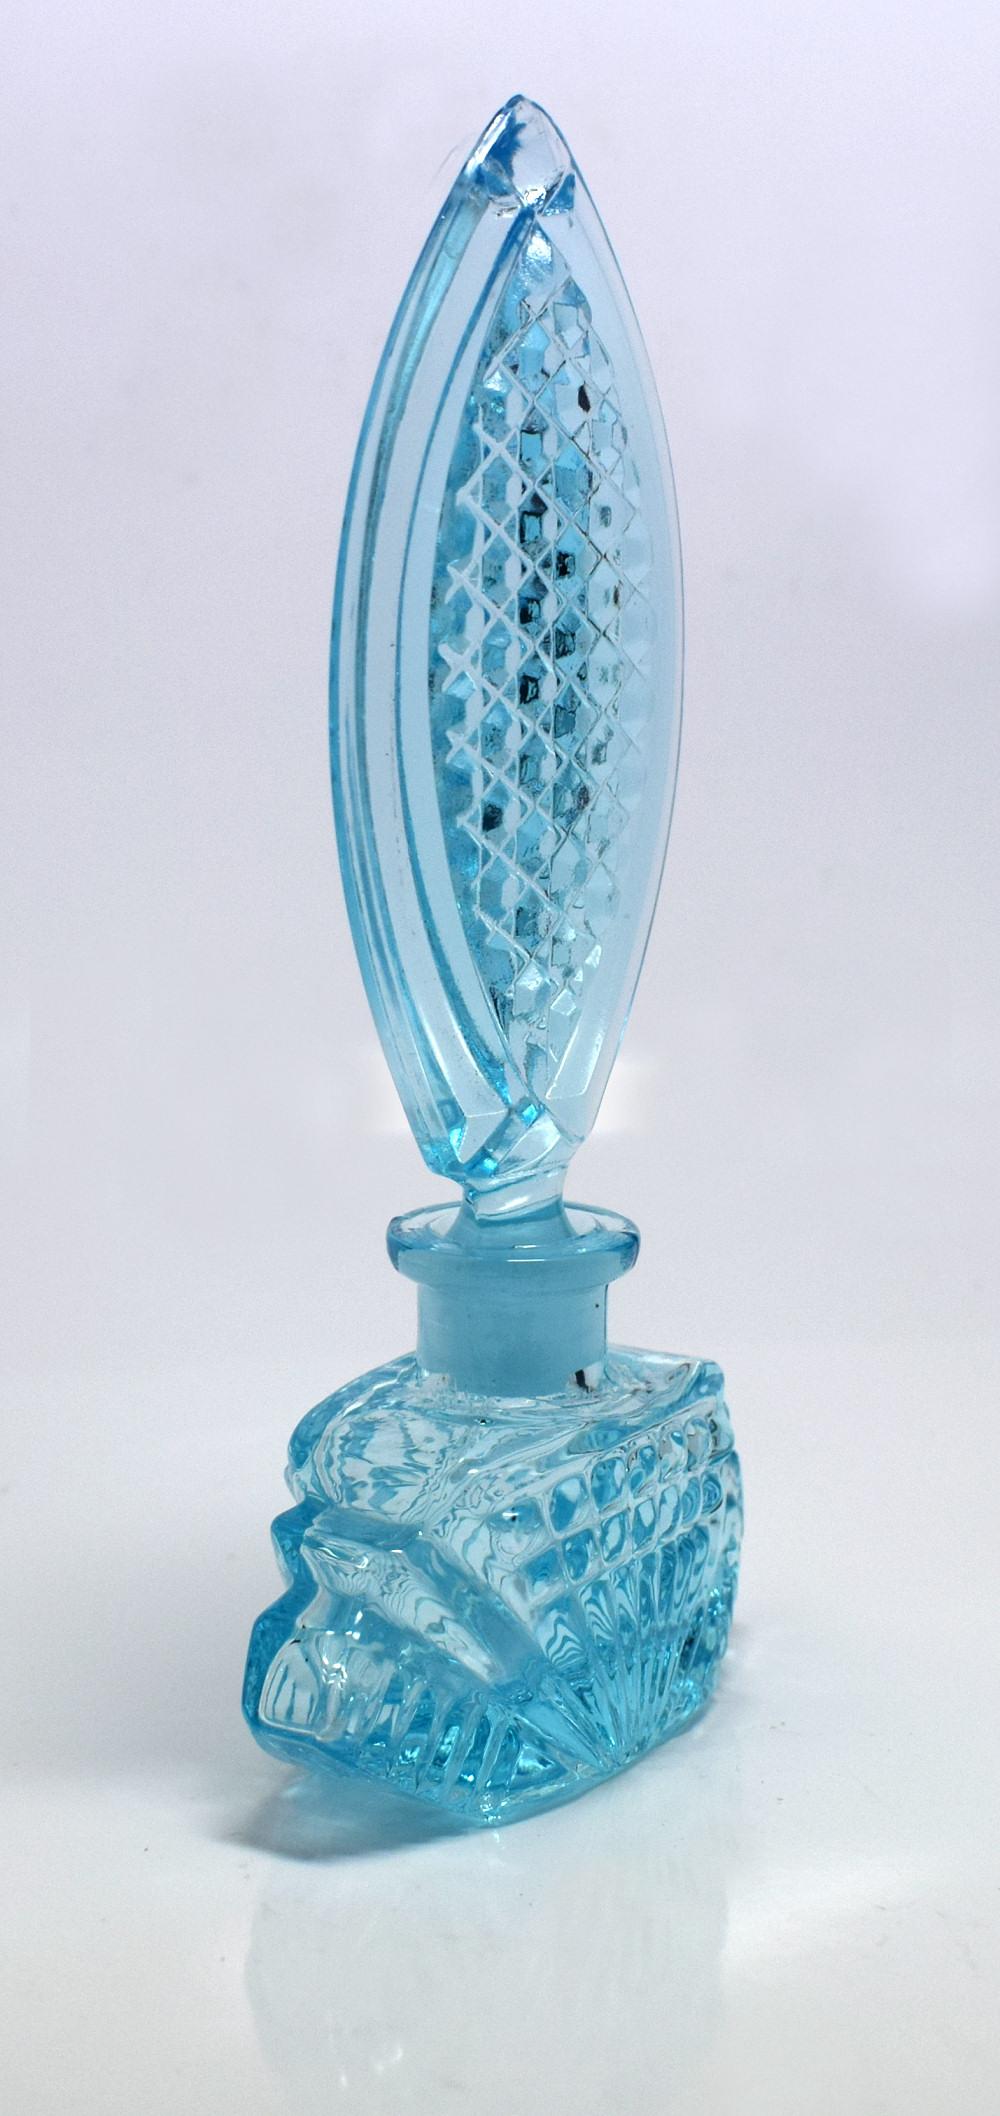 For your consideration is this stylish Art Deco style baby blue glass perfume bottle. Lovely item with no damage, just minor signs of use.